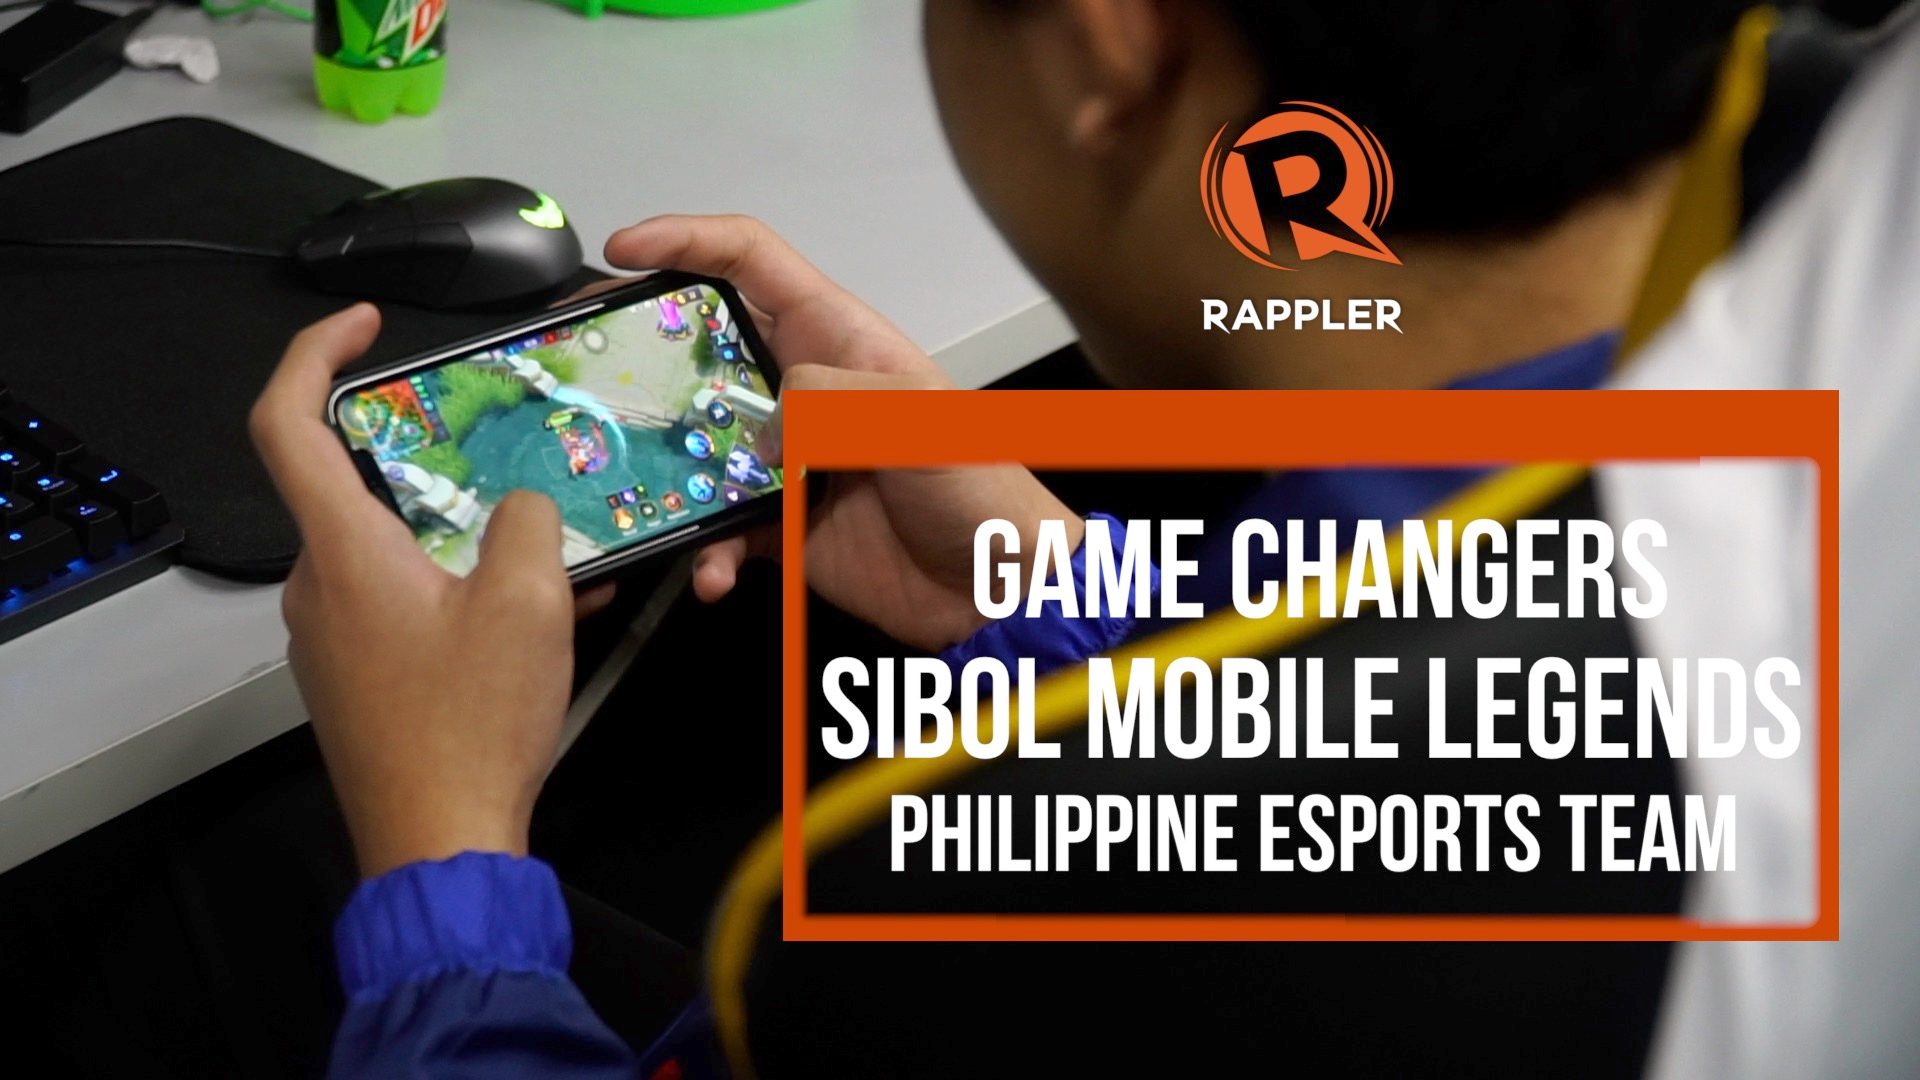 WATCH: Sibol Mobile Legends out to flash competitive game